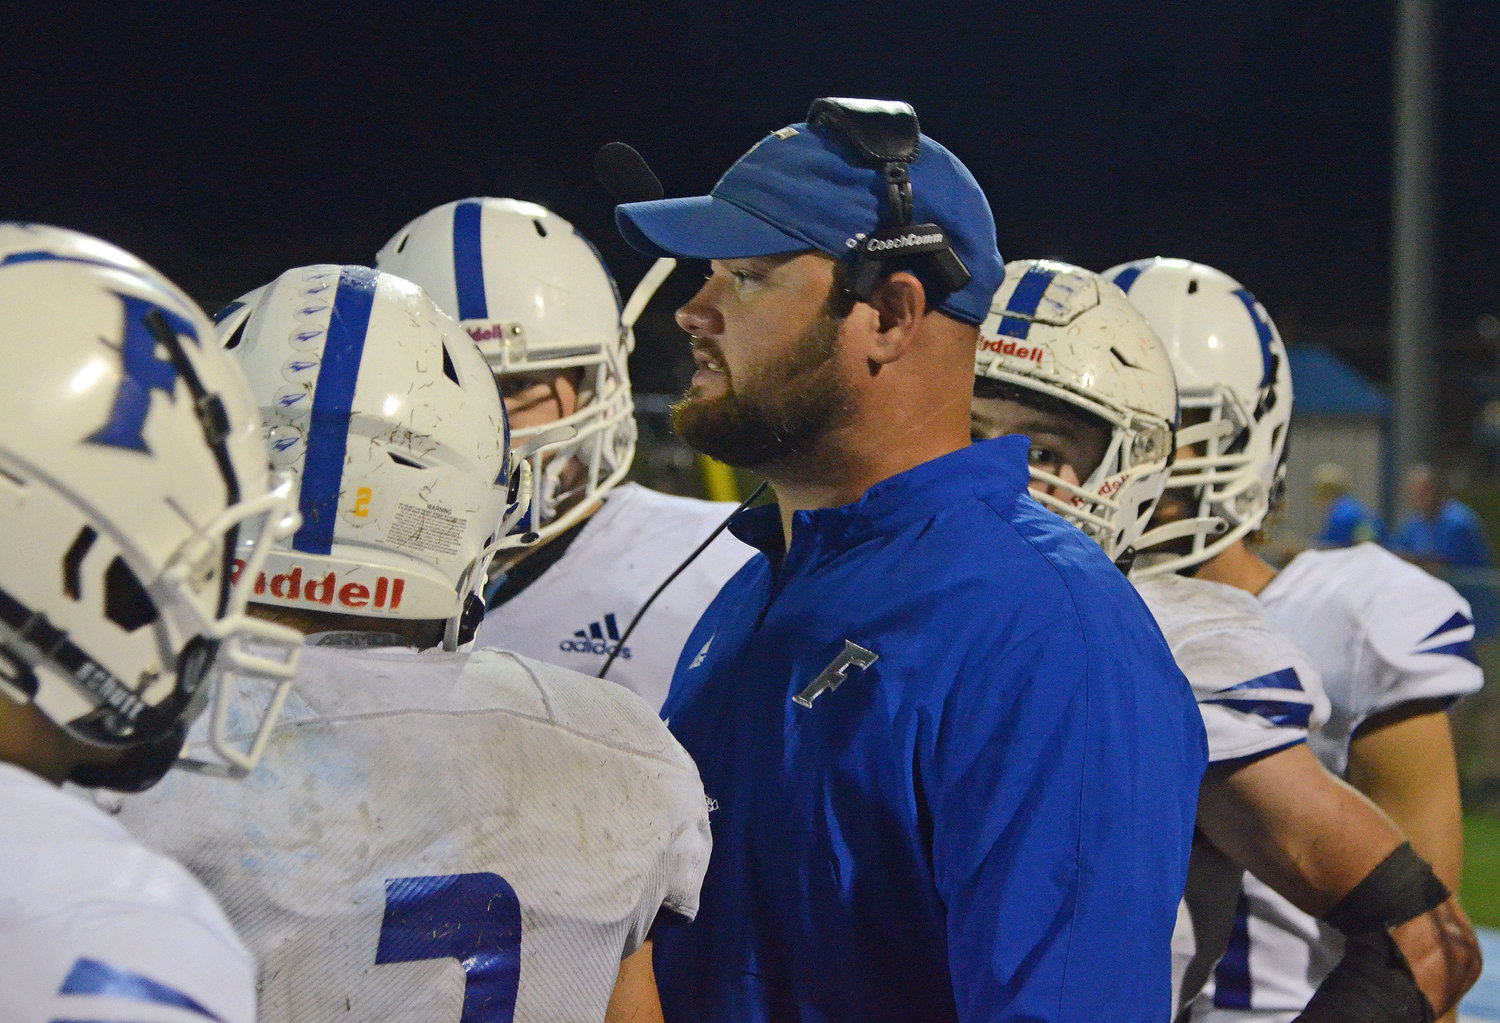 Forrest head coach Eli Stephenson has the Rockets on the cusp of a second region title in three years as he takes his squad to Richland Friday night.